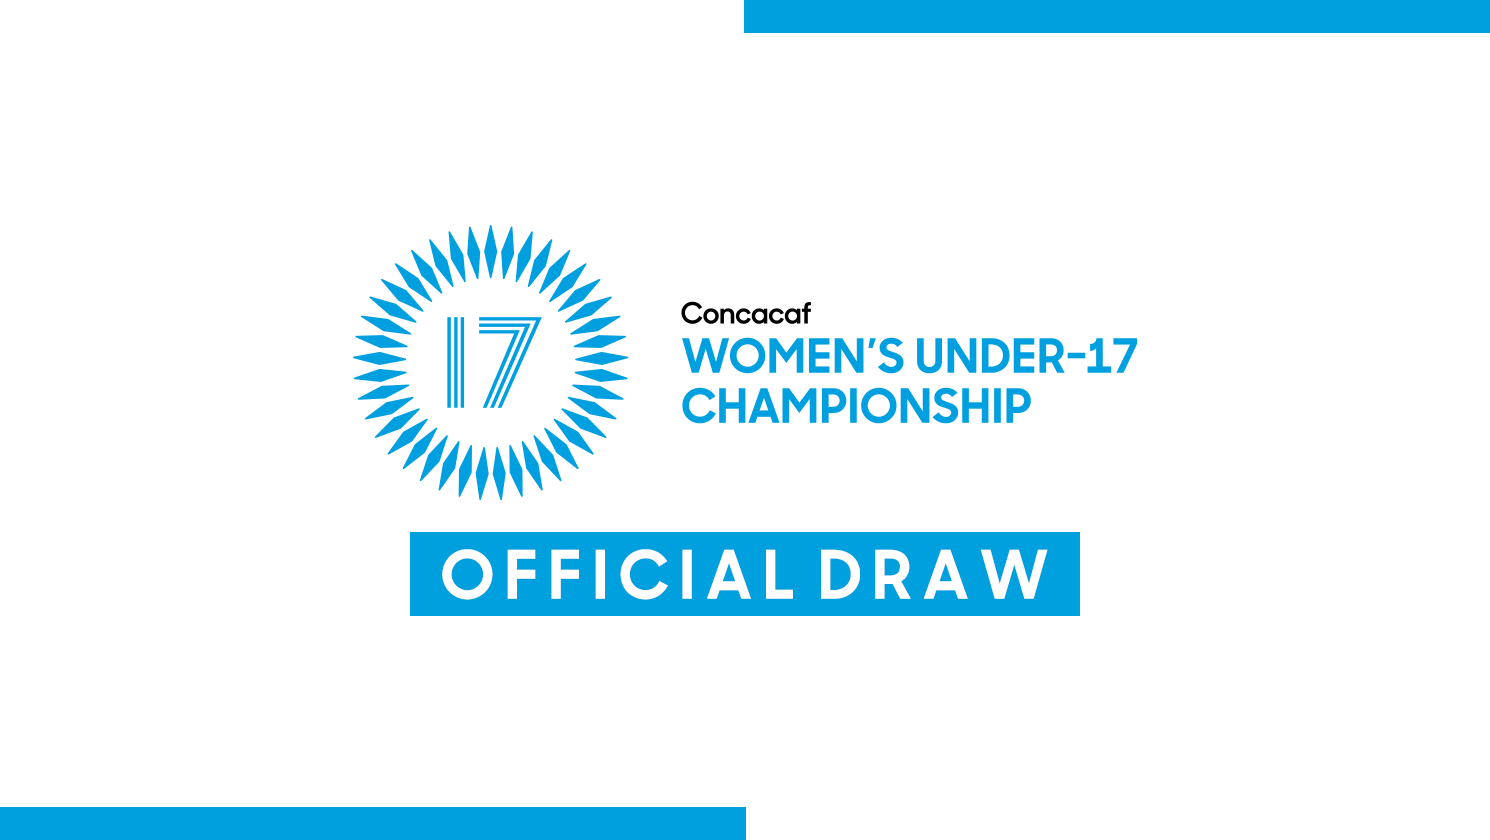 CONCACAF Under-17 Championship - Wikipedia